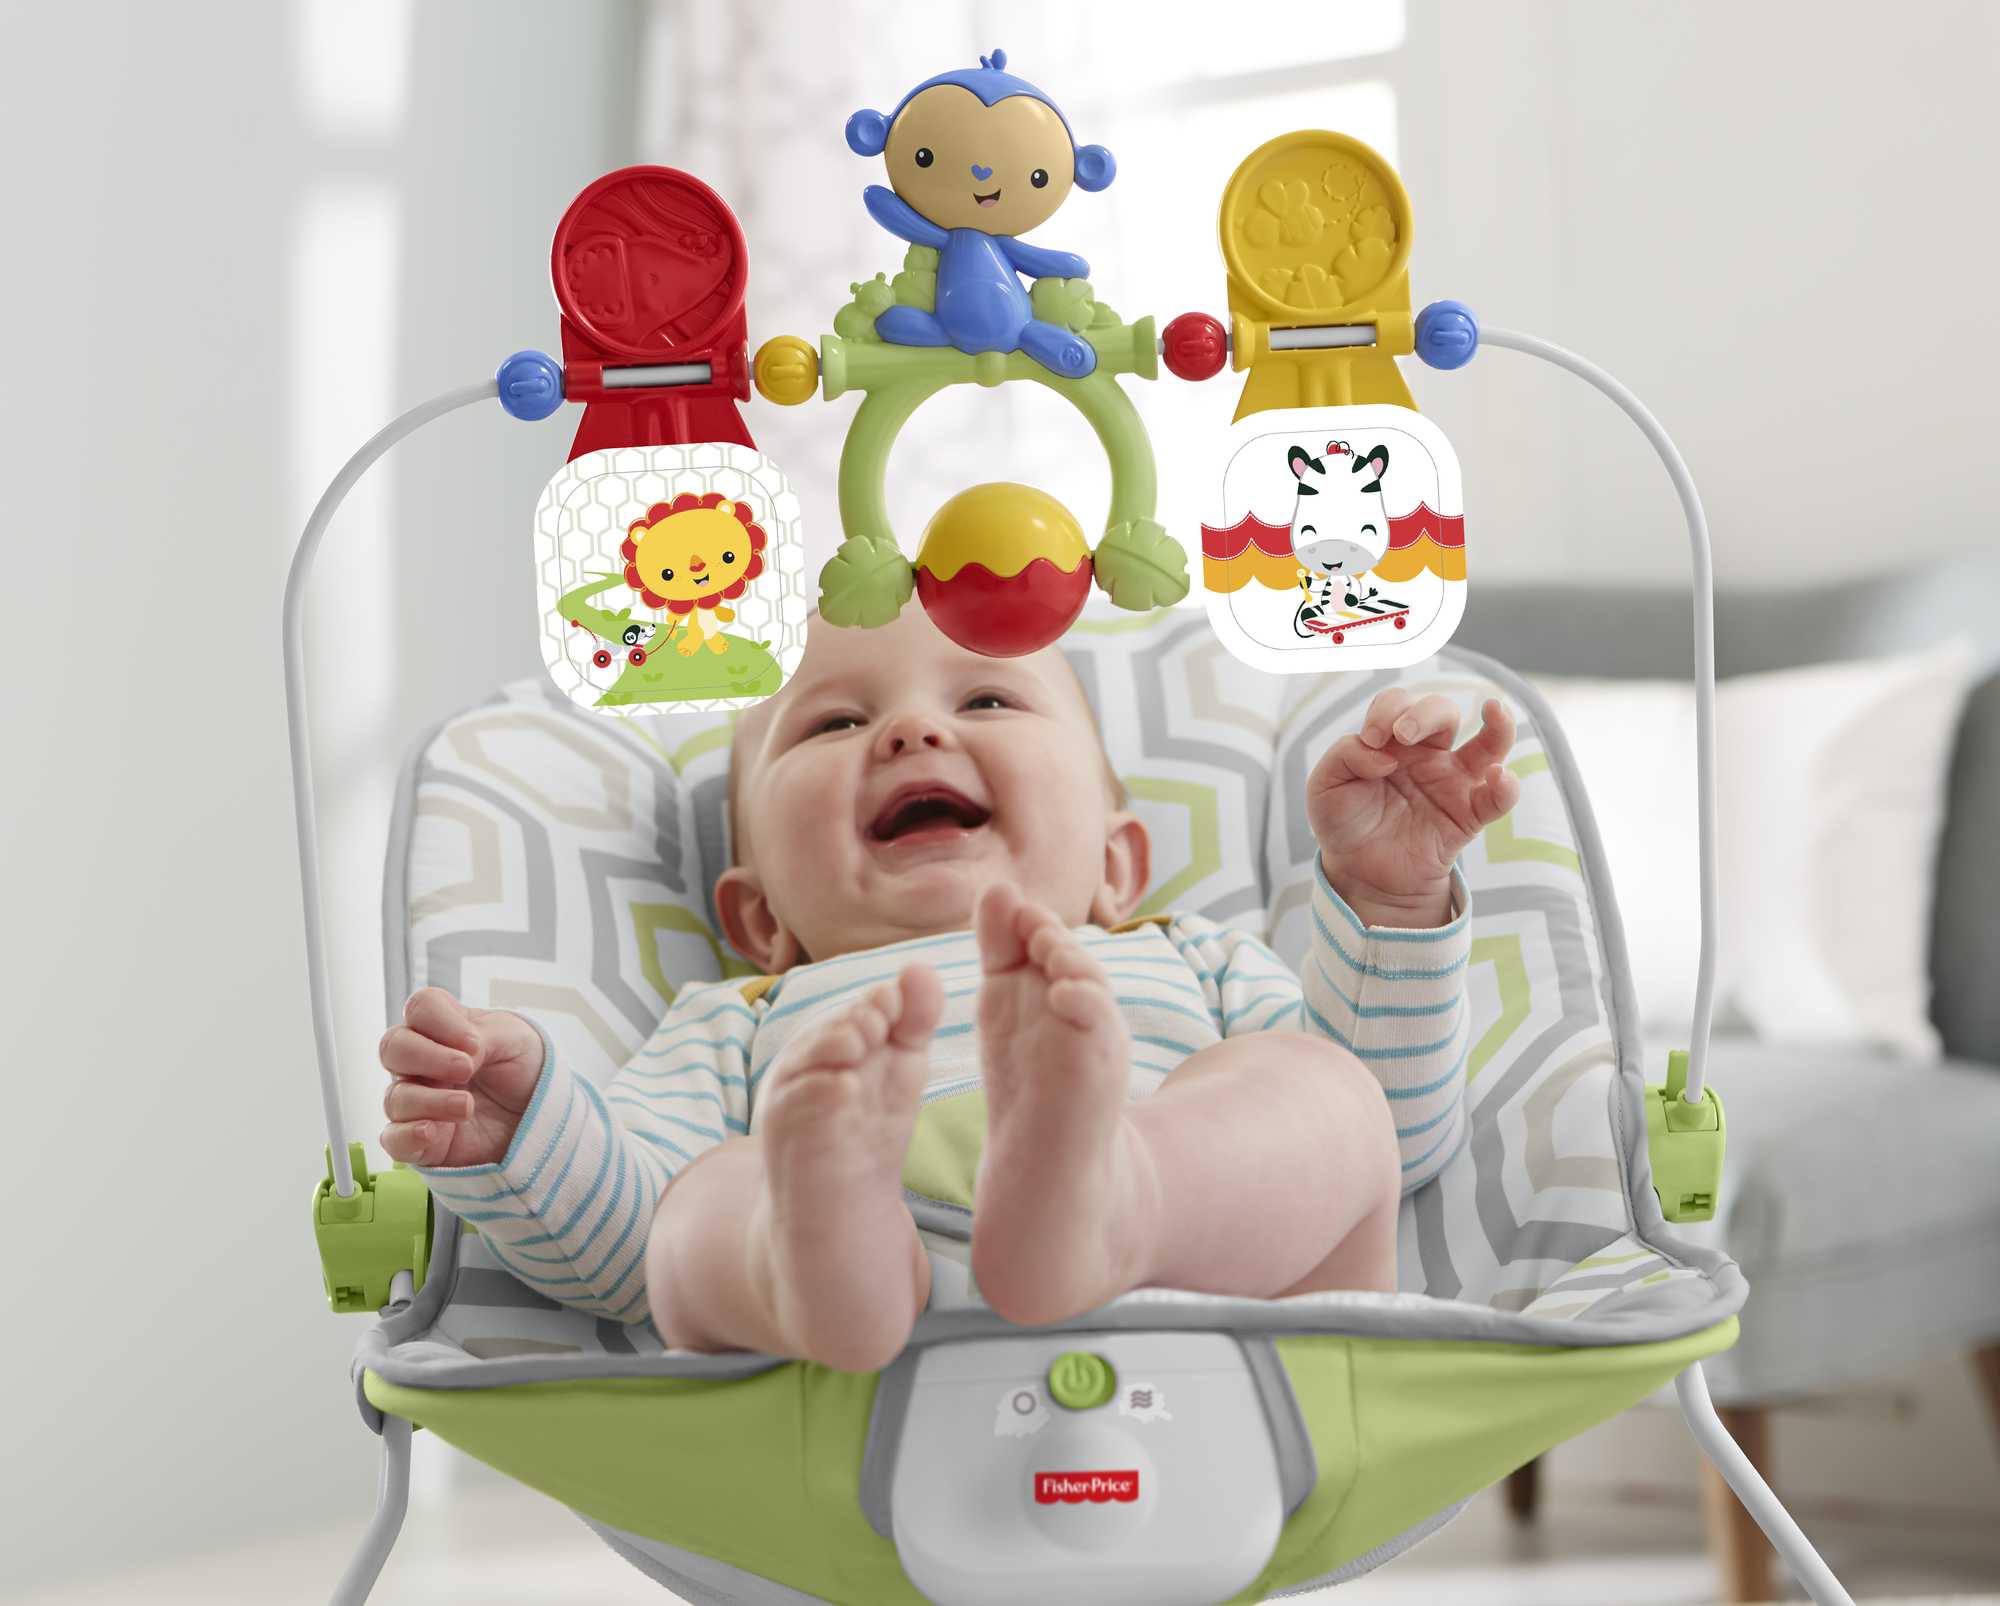 Fisher-Price Baby's Bouncer for Infants Birth+, Geo Meadow - image 3 of 6